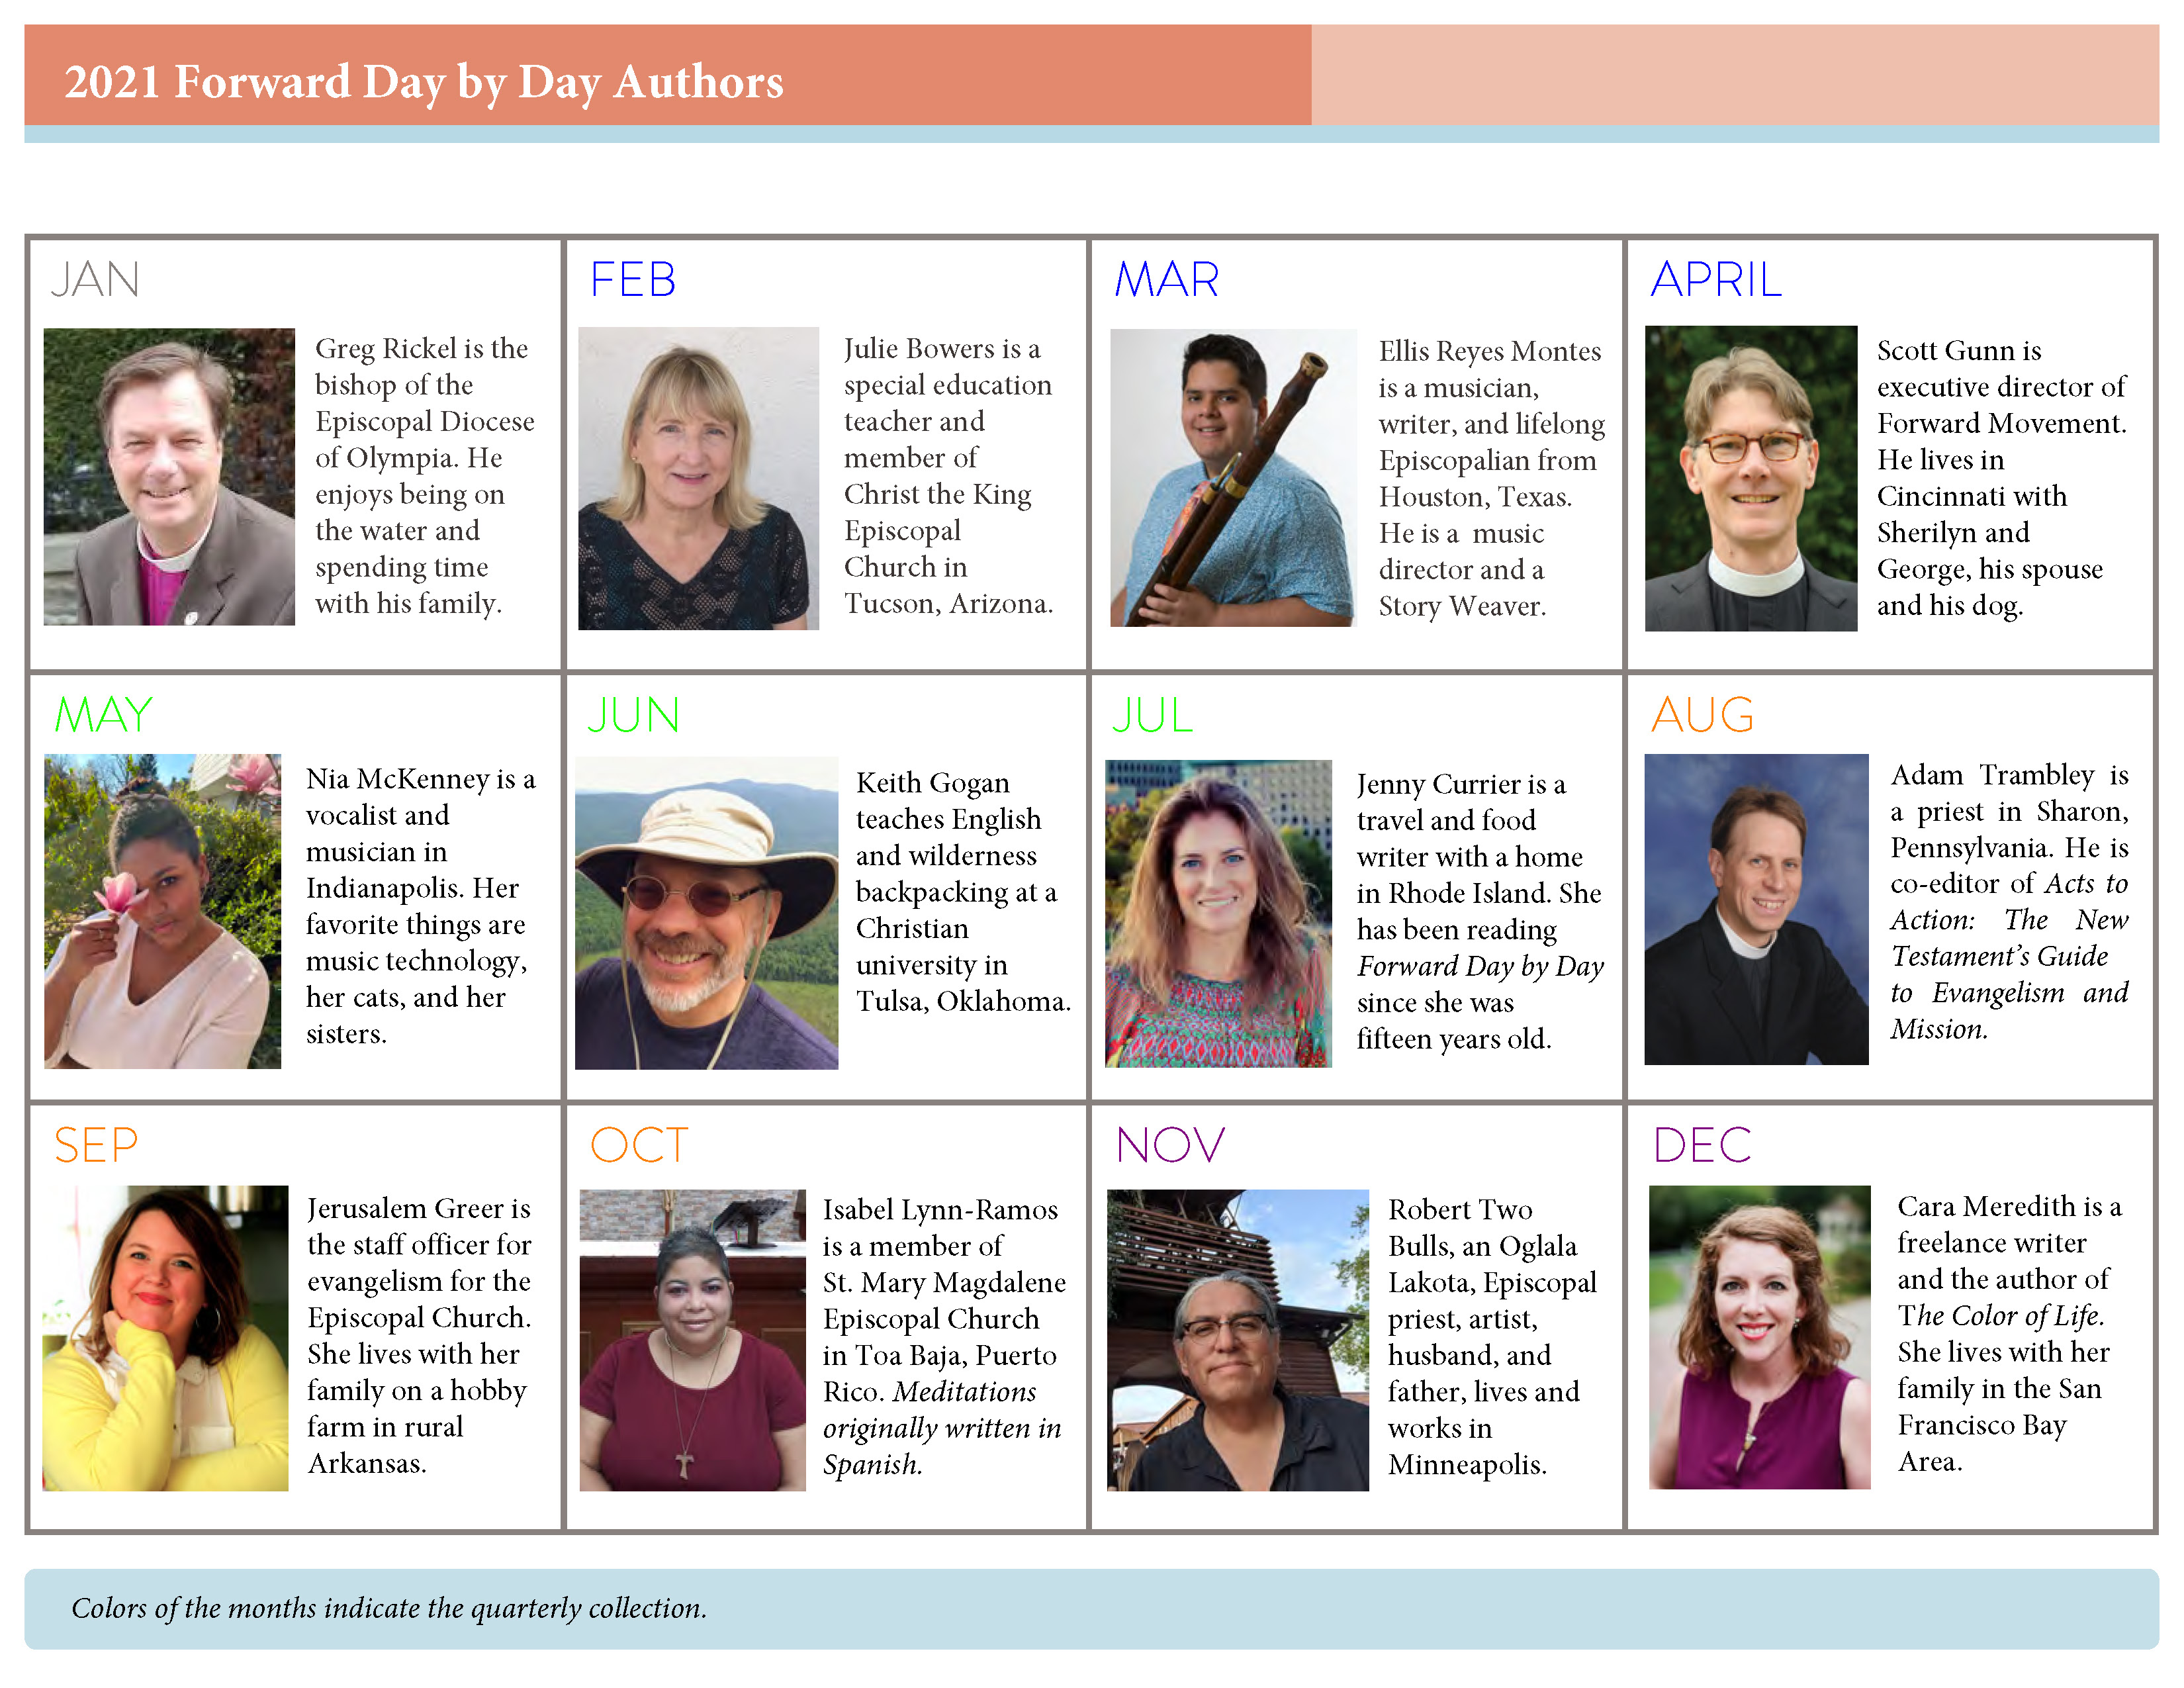 2021 Forward Day by Day authors